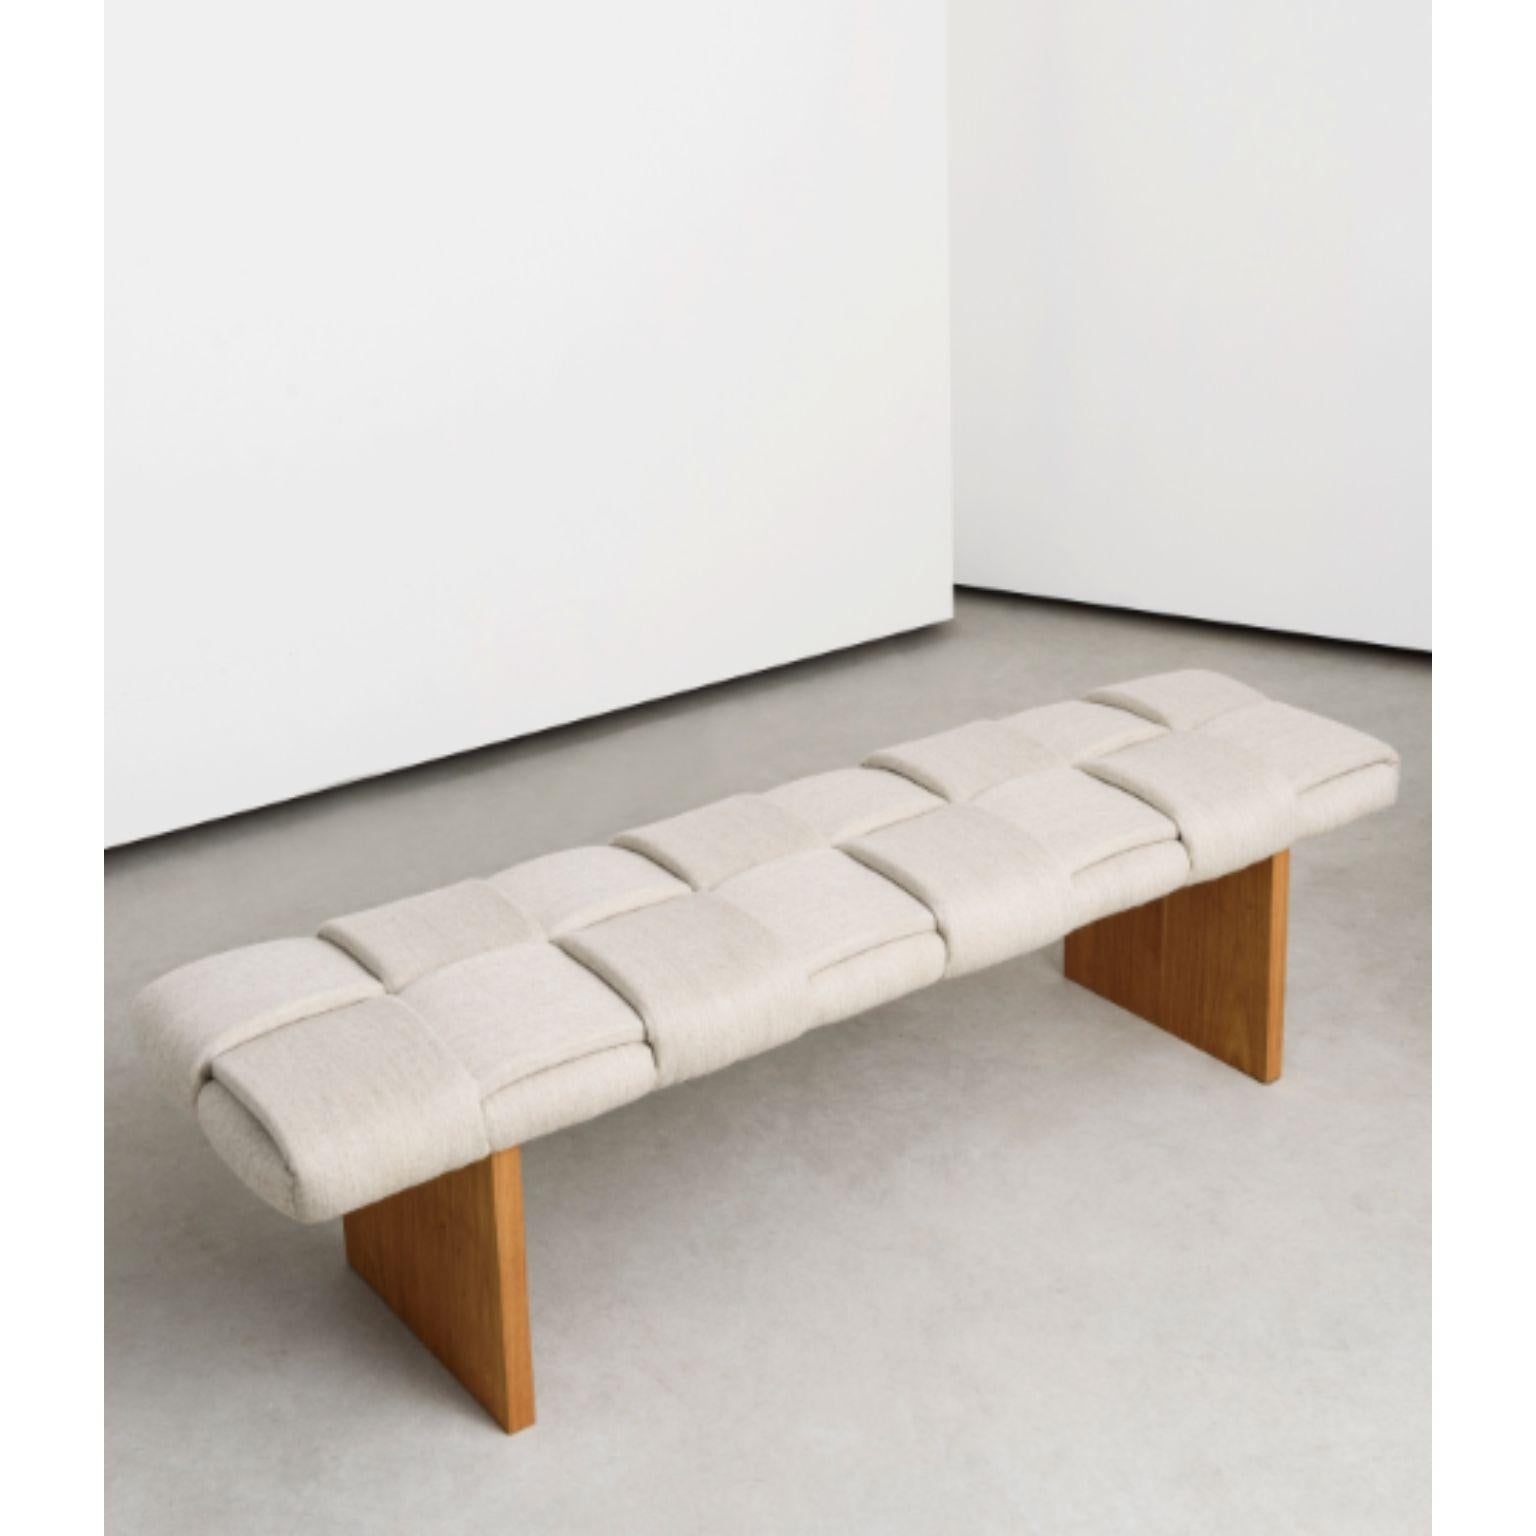 Tramawood 22 bench by Humberto da Mata
Dimensions: L 170 x W 45 x H 45 cm
Materials: Solid Freijó structure, foam, plywood and wool.
Also available in other colors.

Humberto da Mata is a design studio located in São Paulo, Brazil.
Focused on